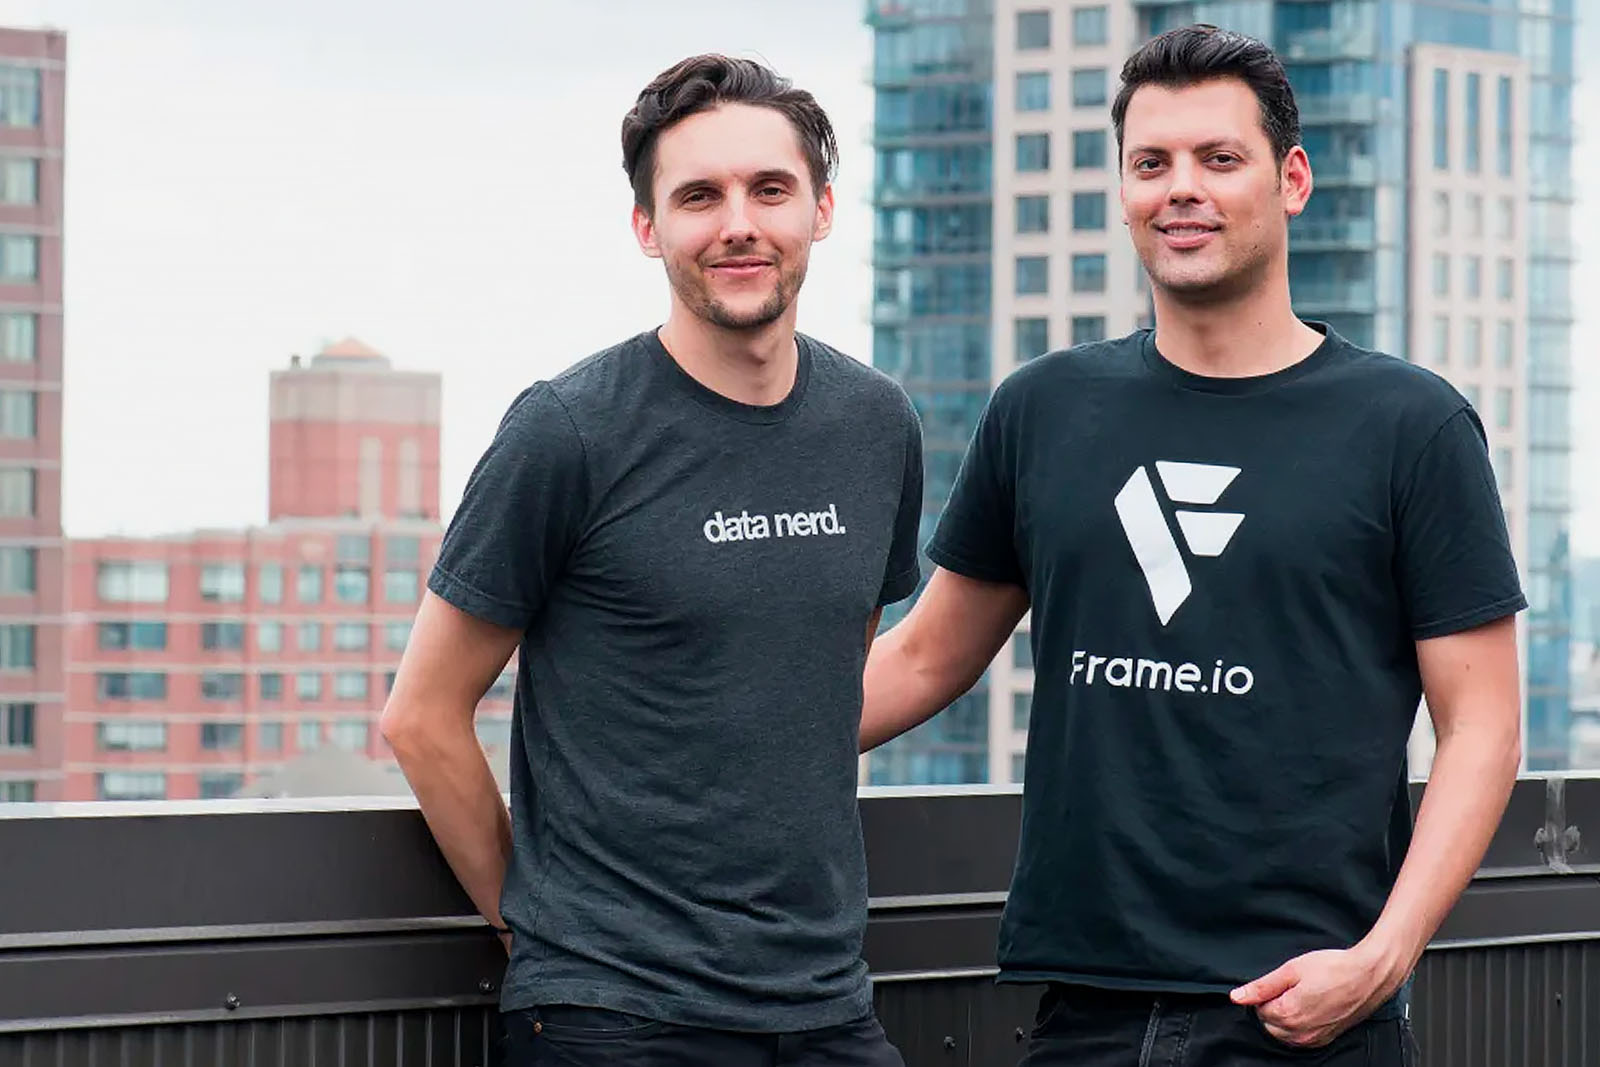 Frame.io founders John Traver (L) and Emery Wells back in 2016.